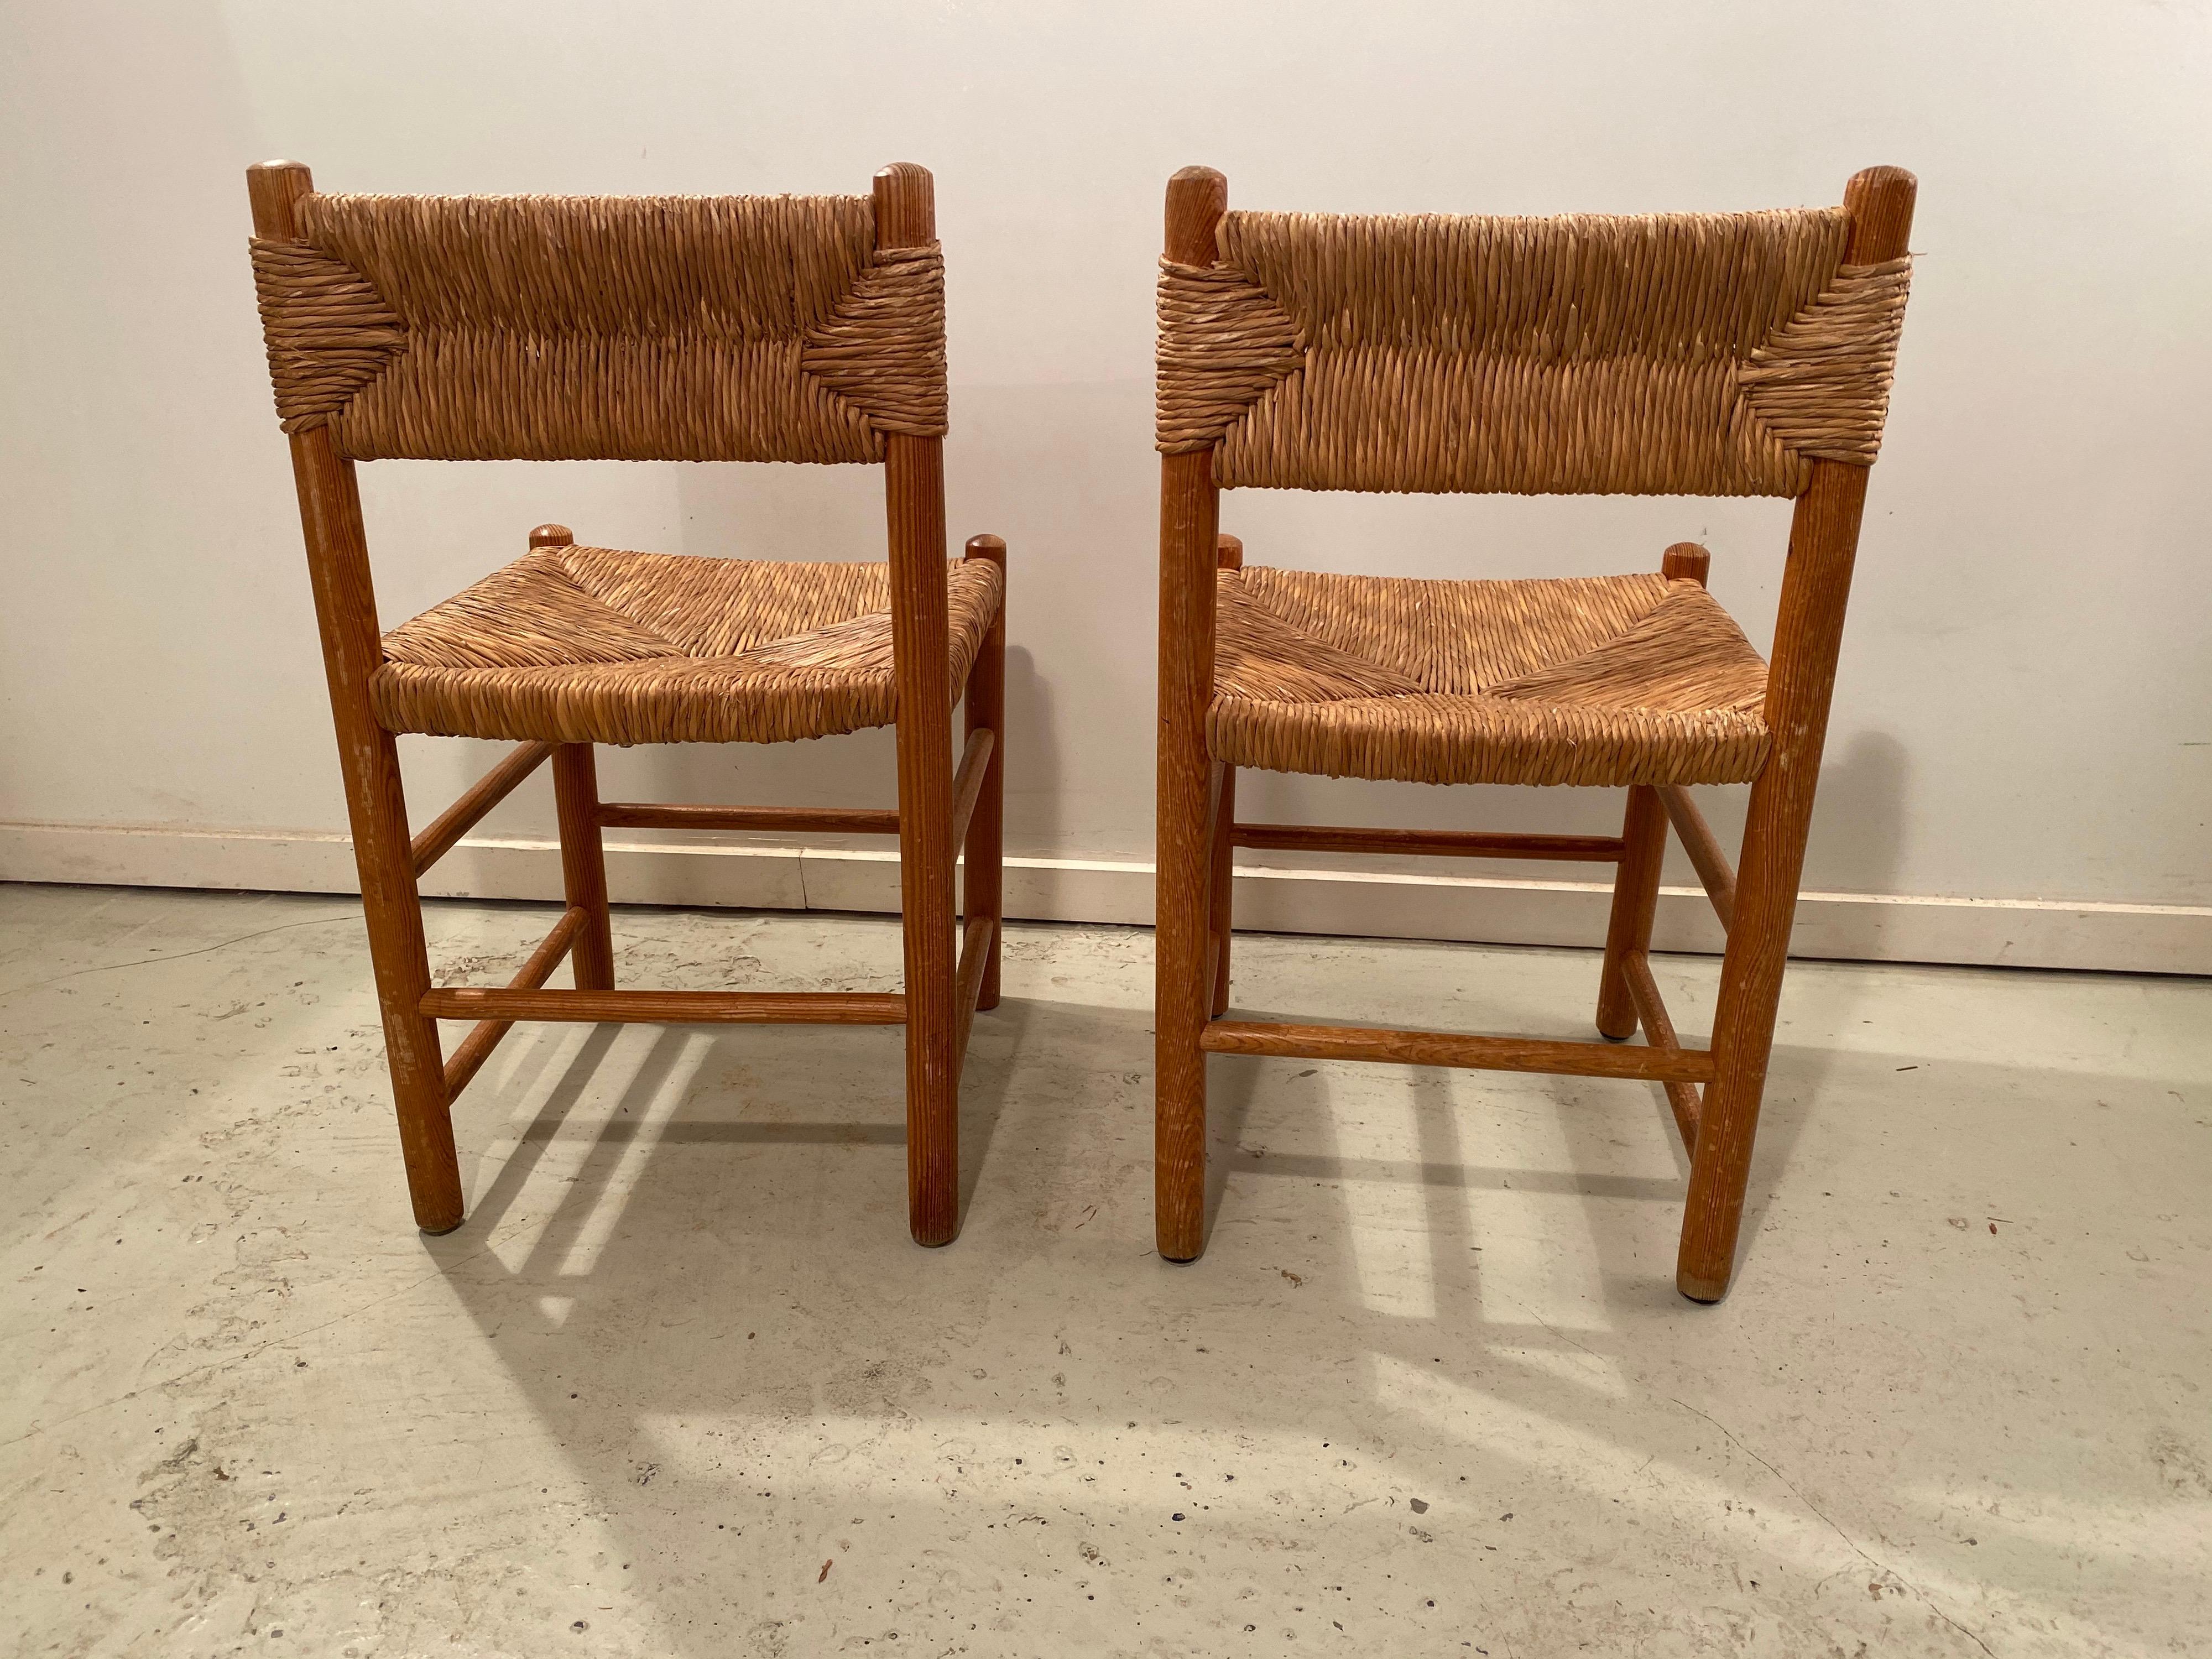 Pair of Wicker Dordogne Chairs by Charlotte Perriand for Sentou, 1950s In Good Condition For Sale In Amsterdam, NL